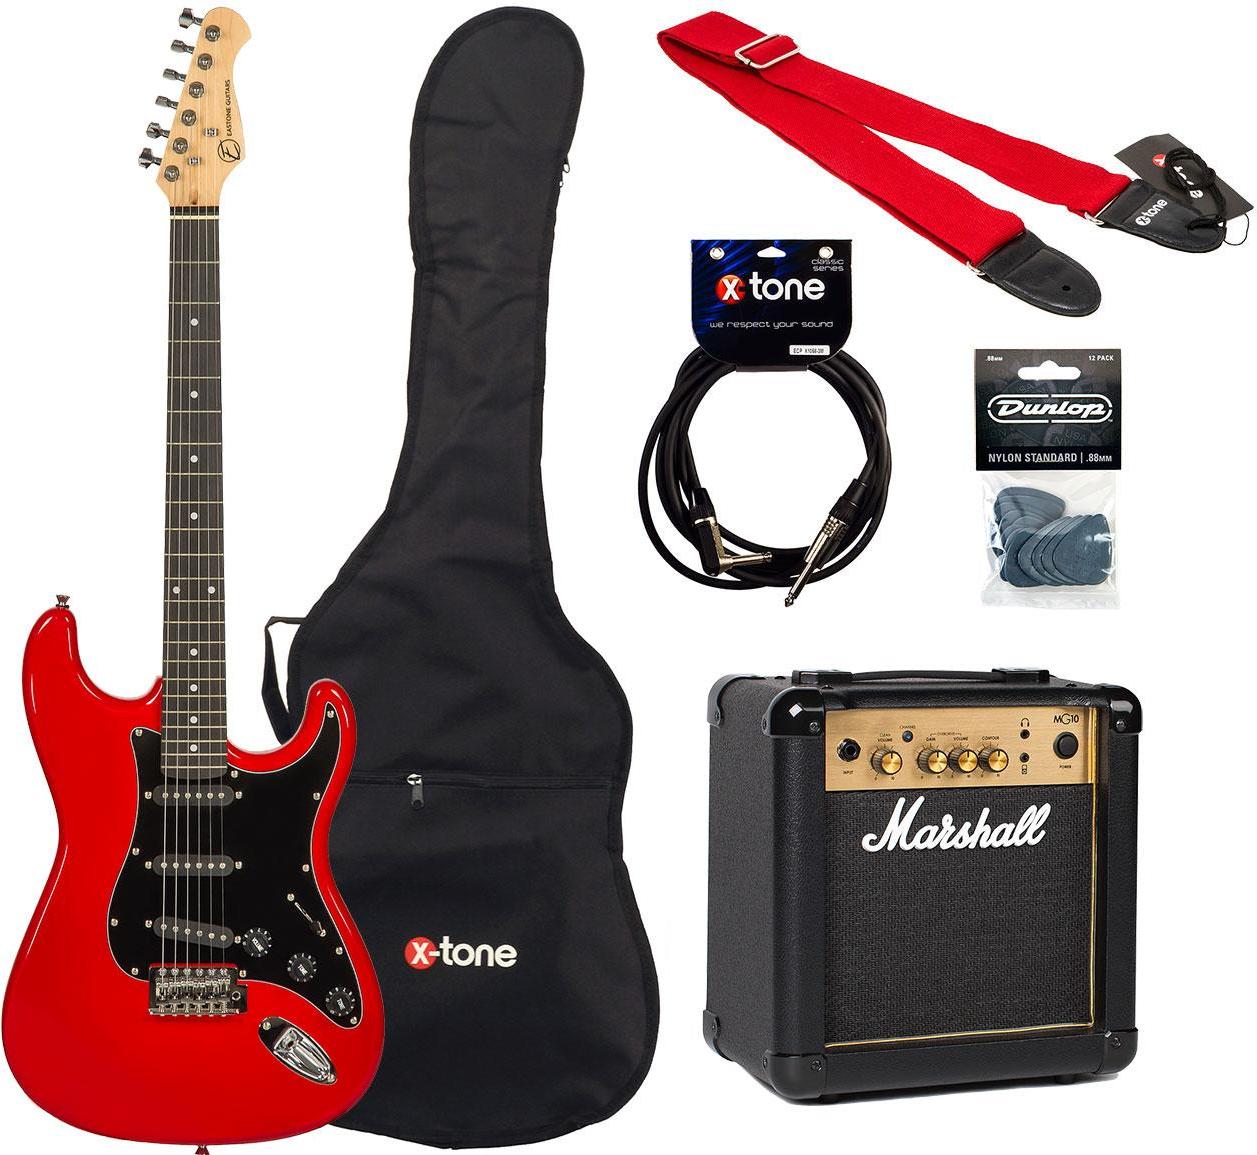 Pack guitare électrique Eastone STR70T +Marshall MG10G +Accessories - Ferrari red